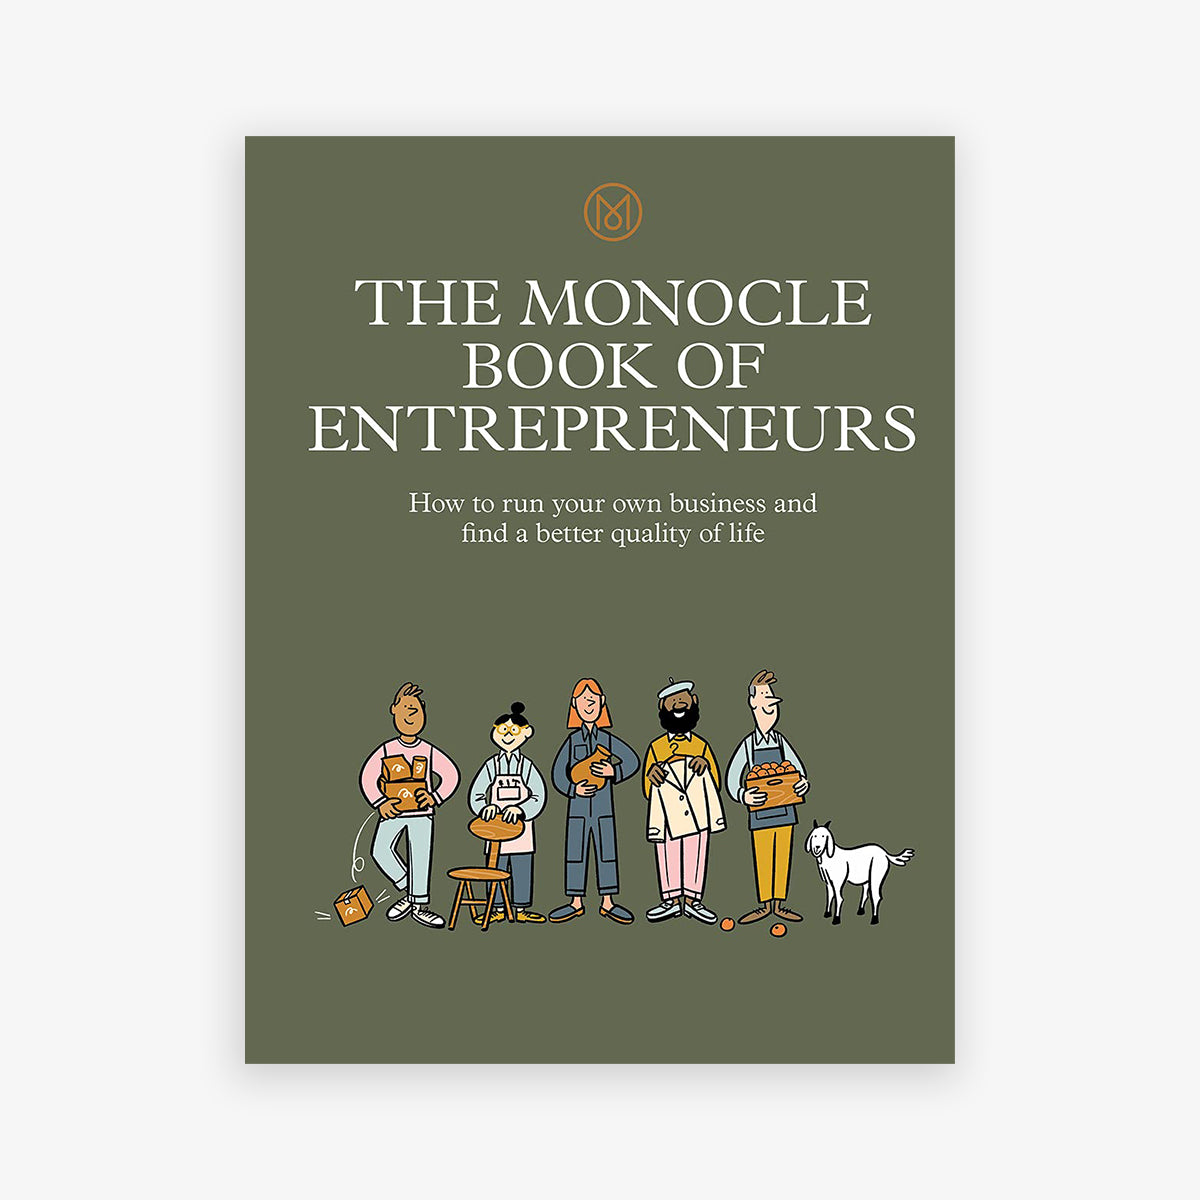 BOOK 'THE MONOCLE BOOK OF ENTREPRENEURS'